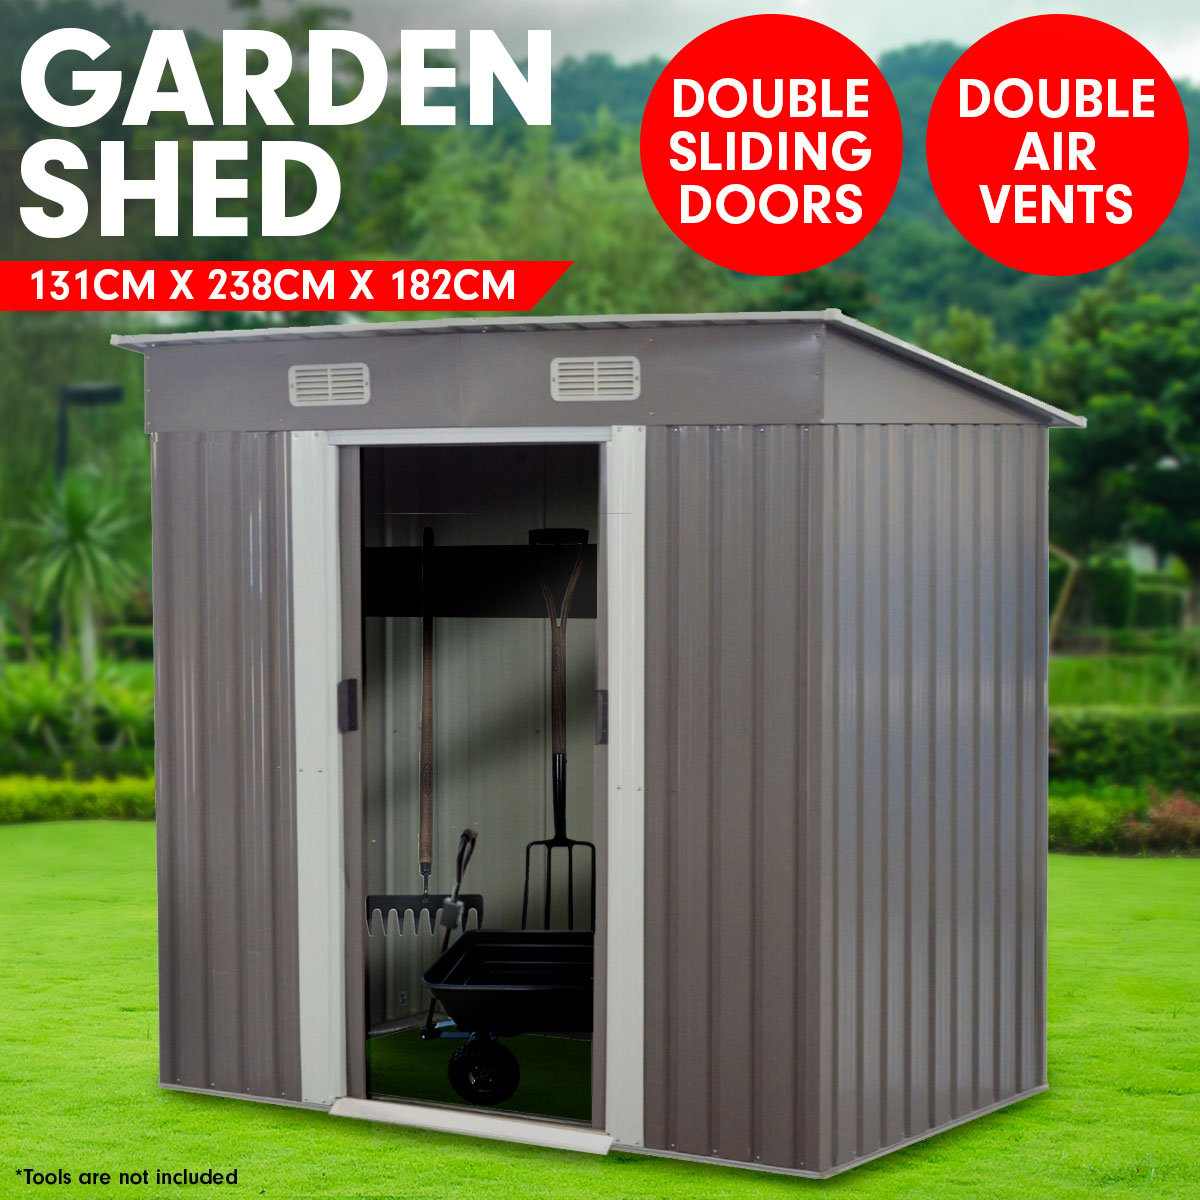 4ft x 8ft Garden Shed Flat Roof Outdoor Storage - Grey 2